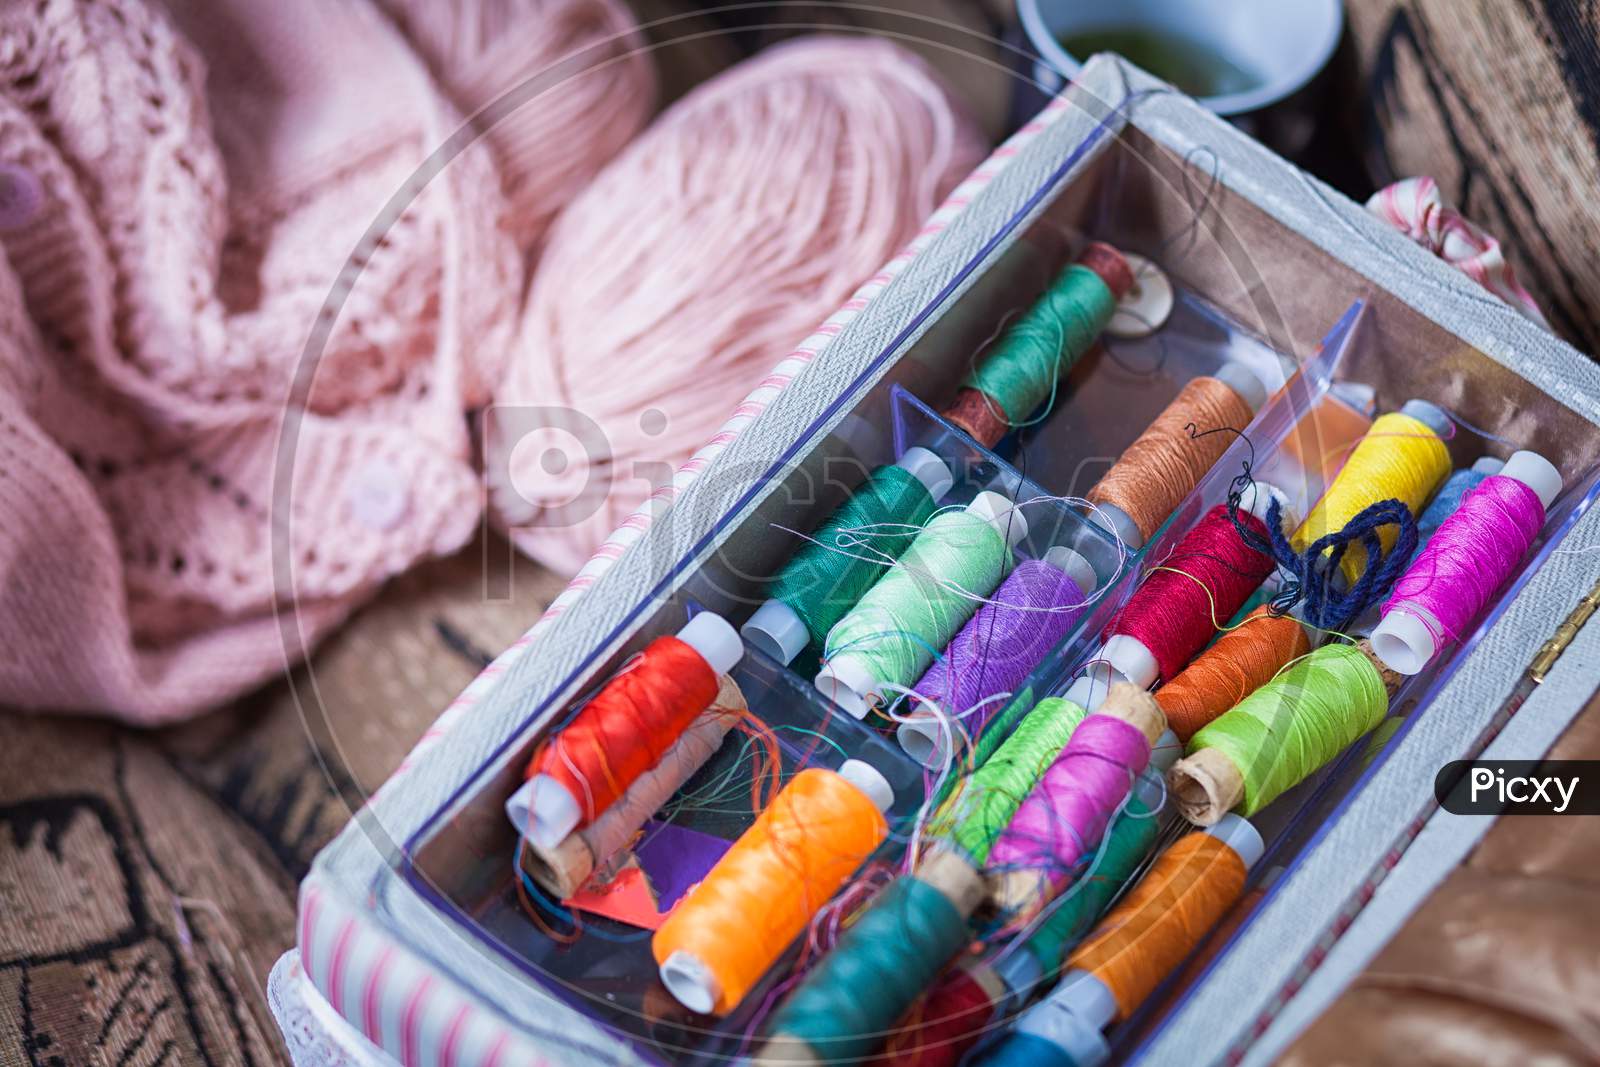 The Still Life Of A Tangle Of Pink Woolen Threads, An Unbound Pink Sweater And A Multitude Of Coils Of Thread Of Different Colors In The Box In Even Rows Lie On A Brown Vein, The Top View